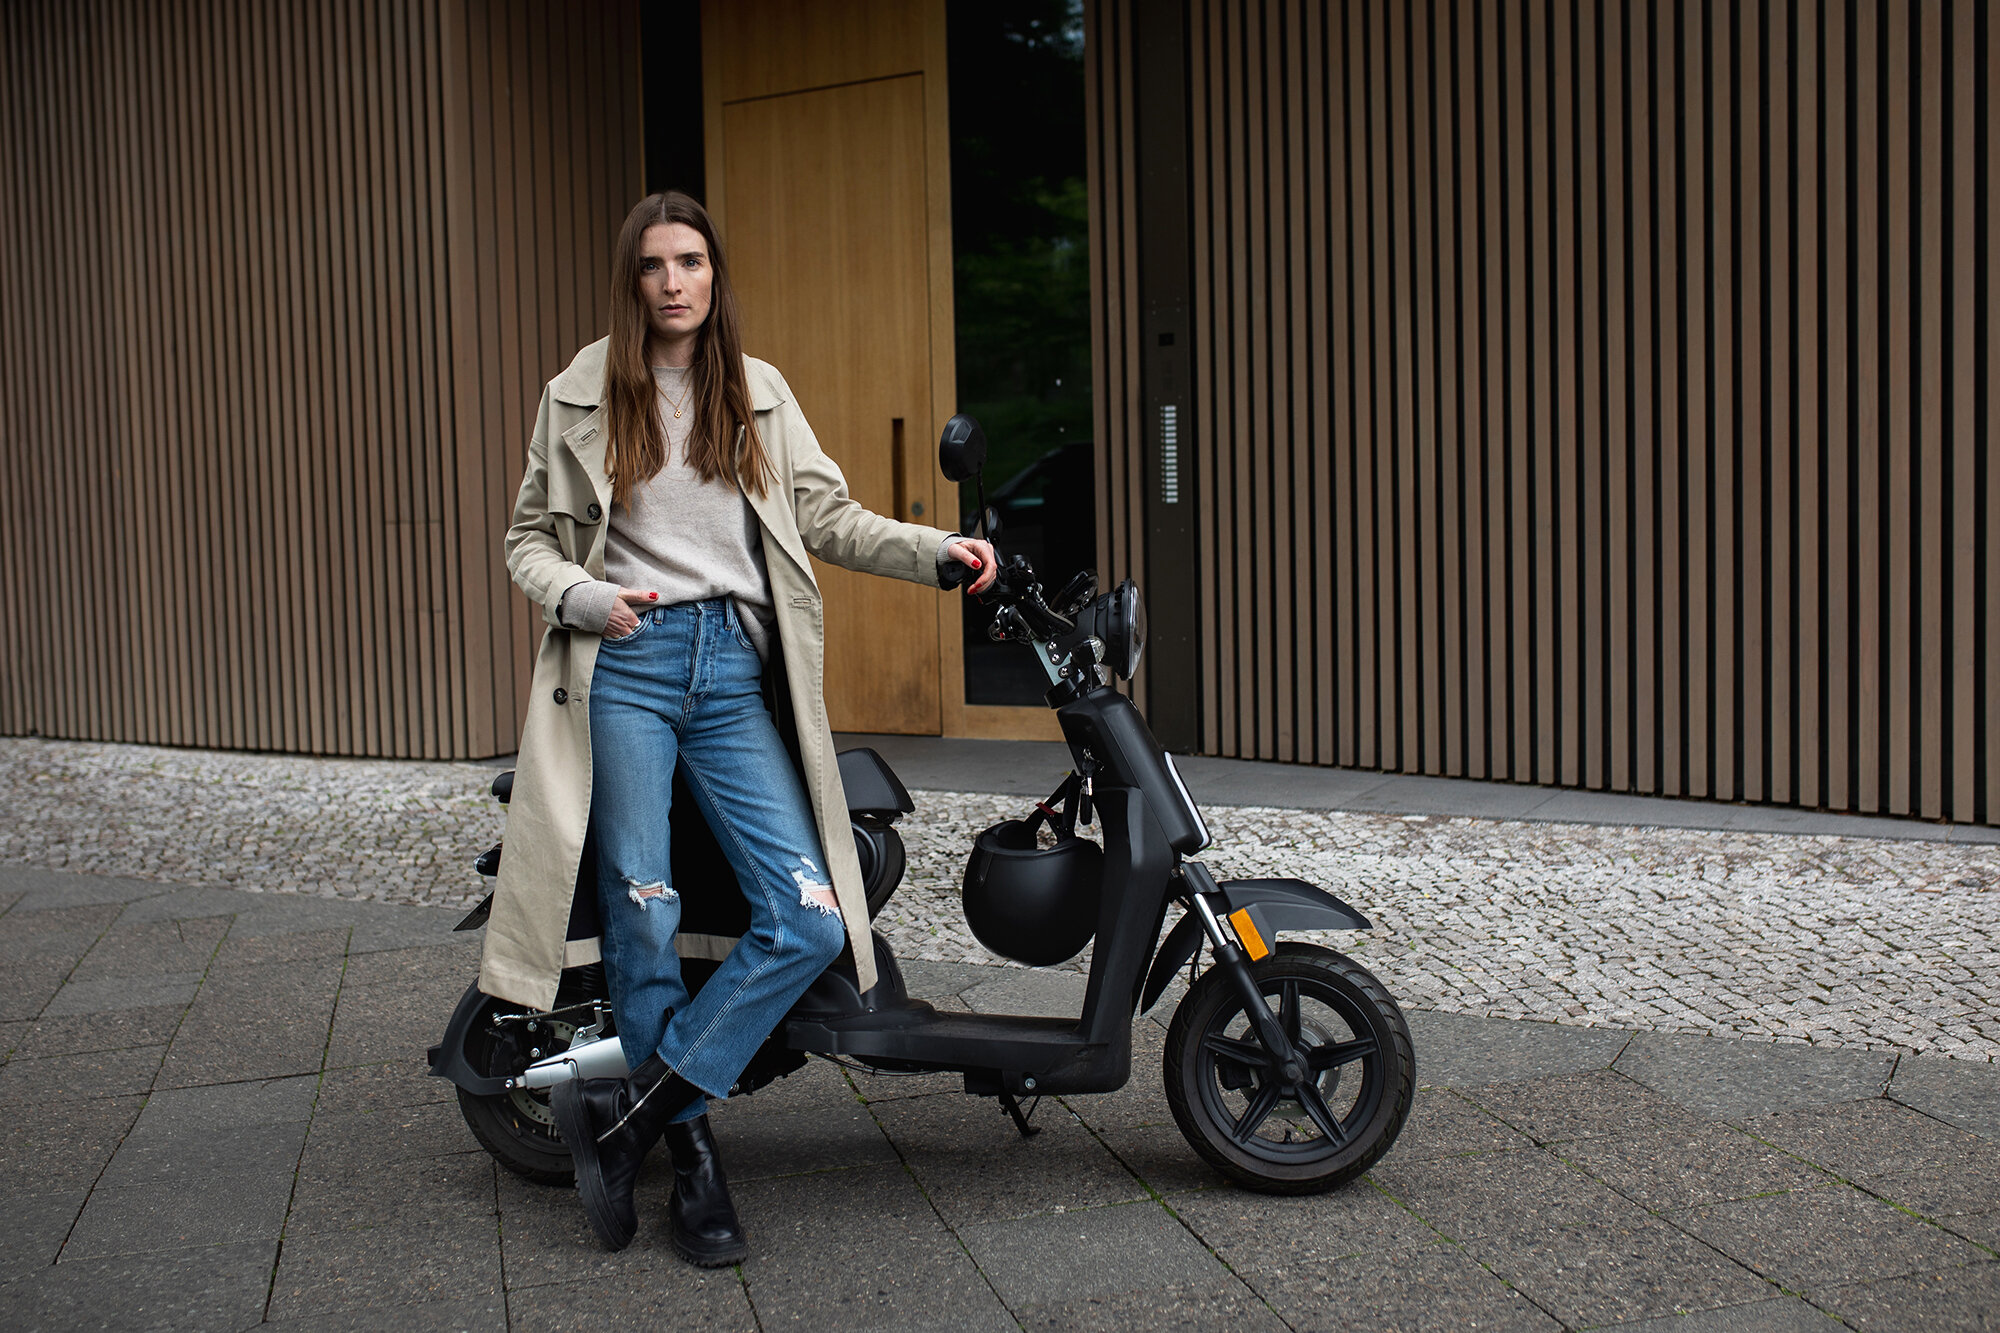 Britta Reineke, founder of ellectric tests the e-scooter from Vostok